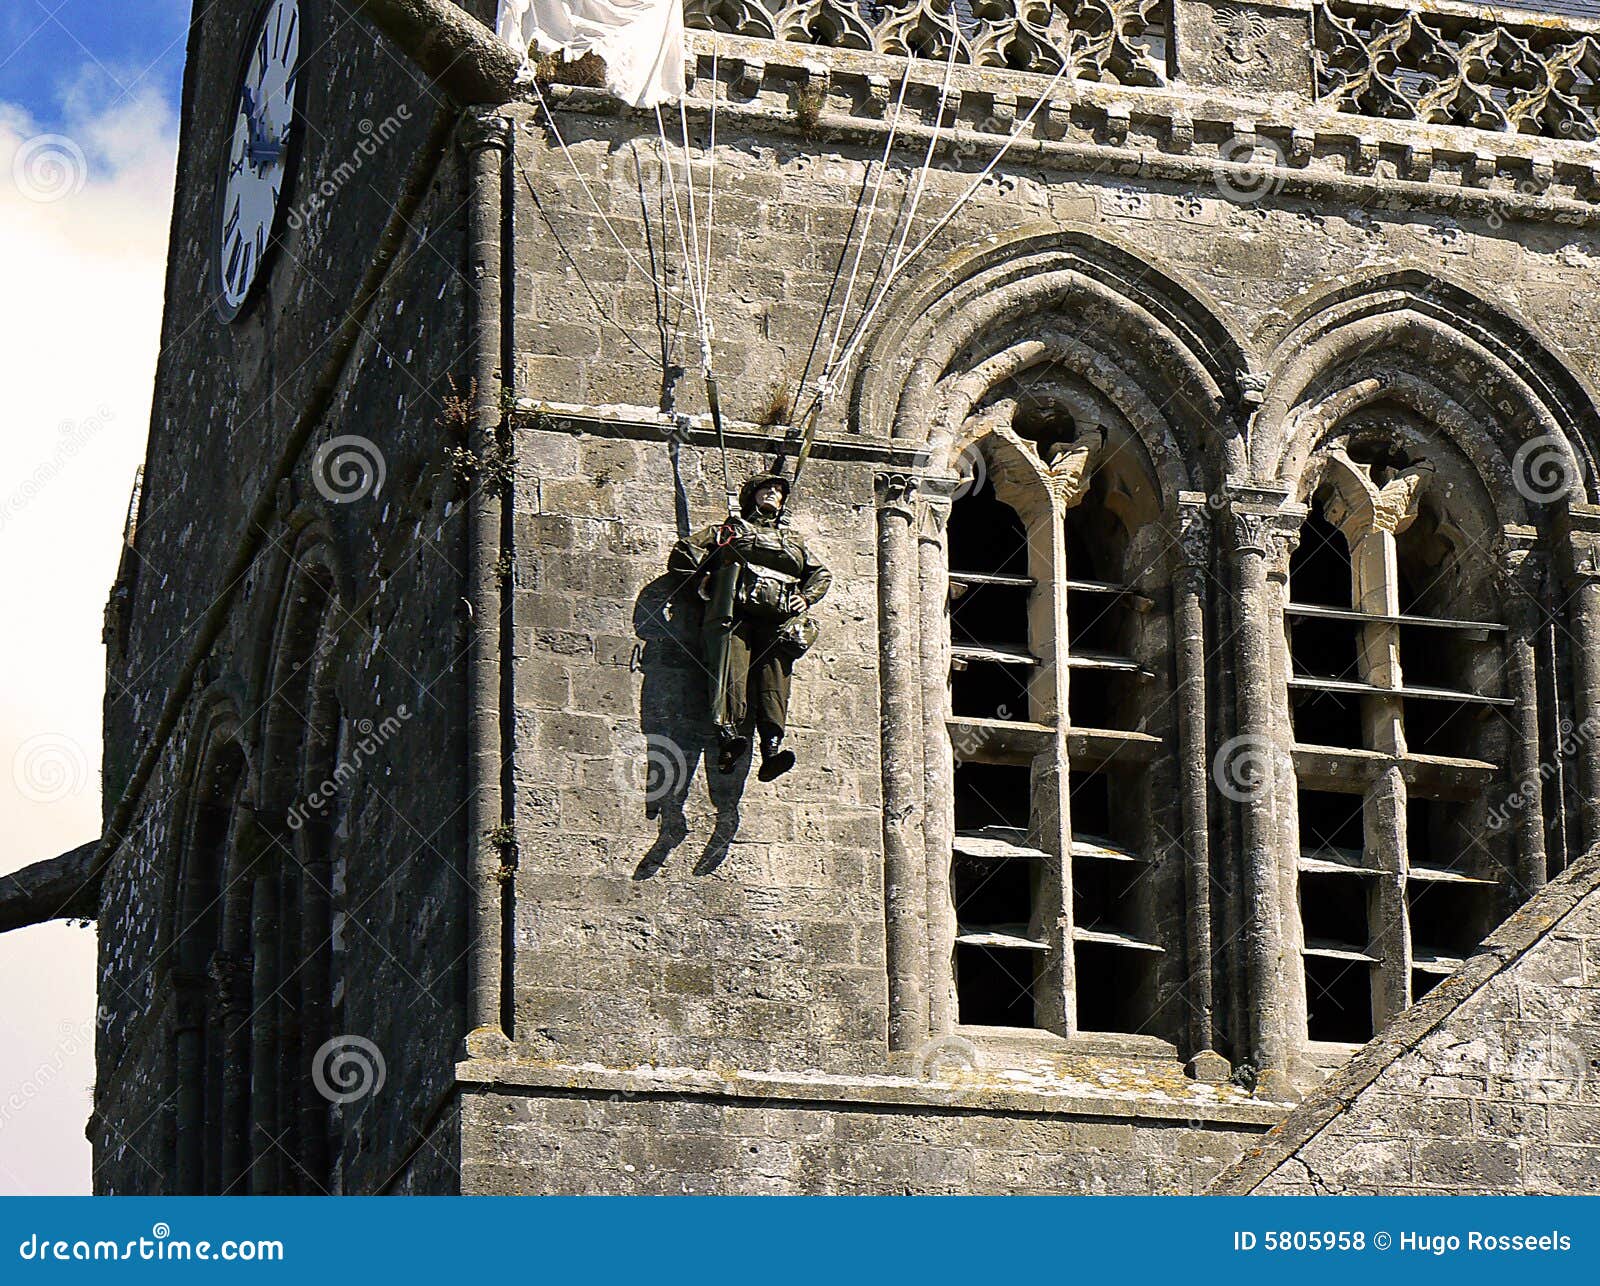 parachutist in bell tower, normandy